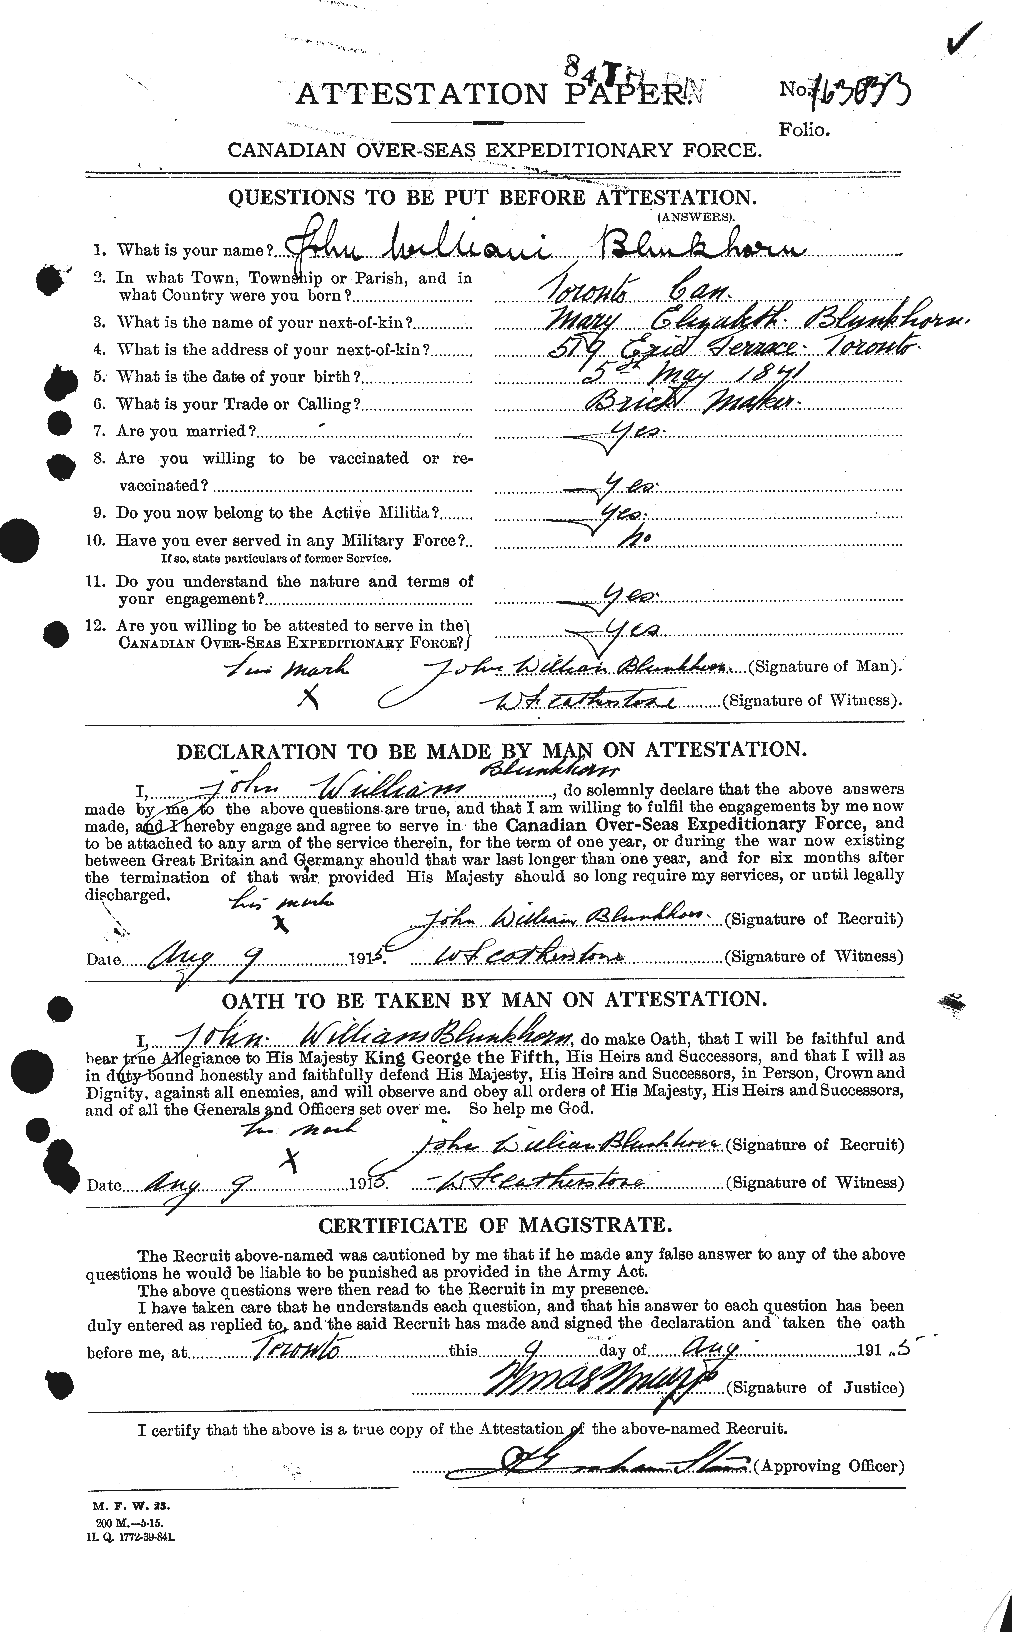 Personnel Records of the First World War - CEF 247980a